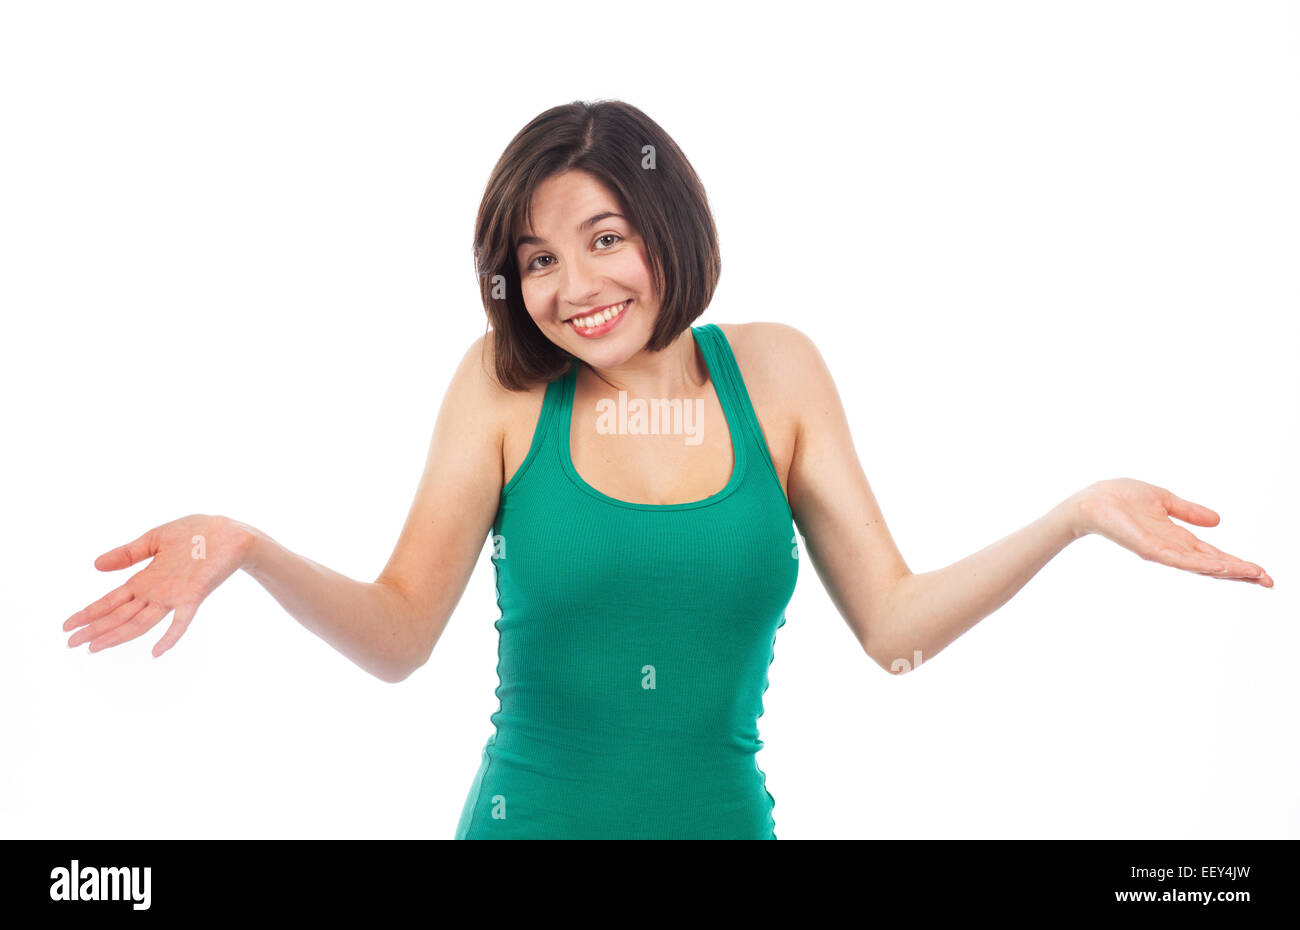 Portrait of a young brunette having a doubting gesture, isolated on white Stock Photo